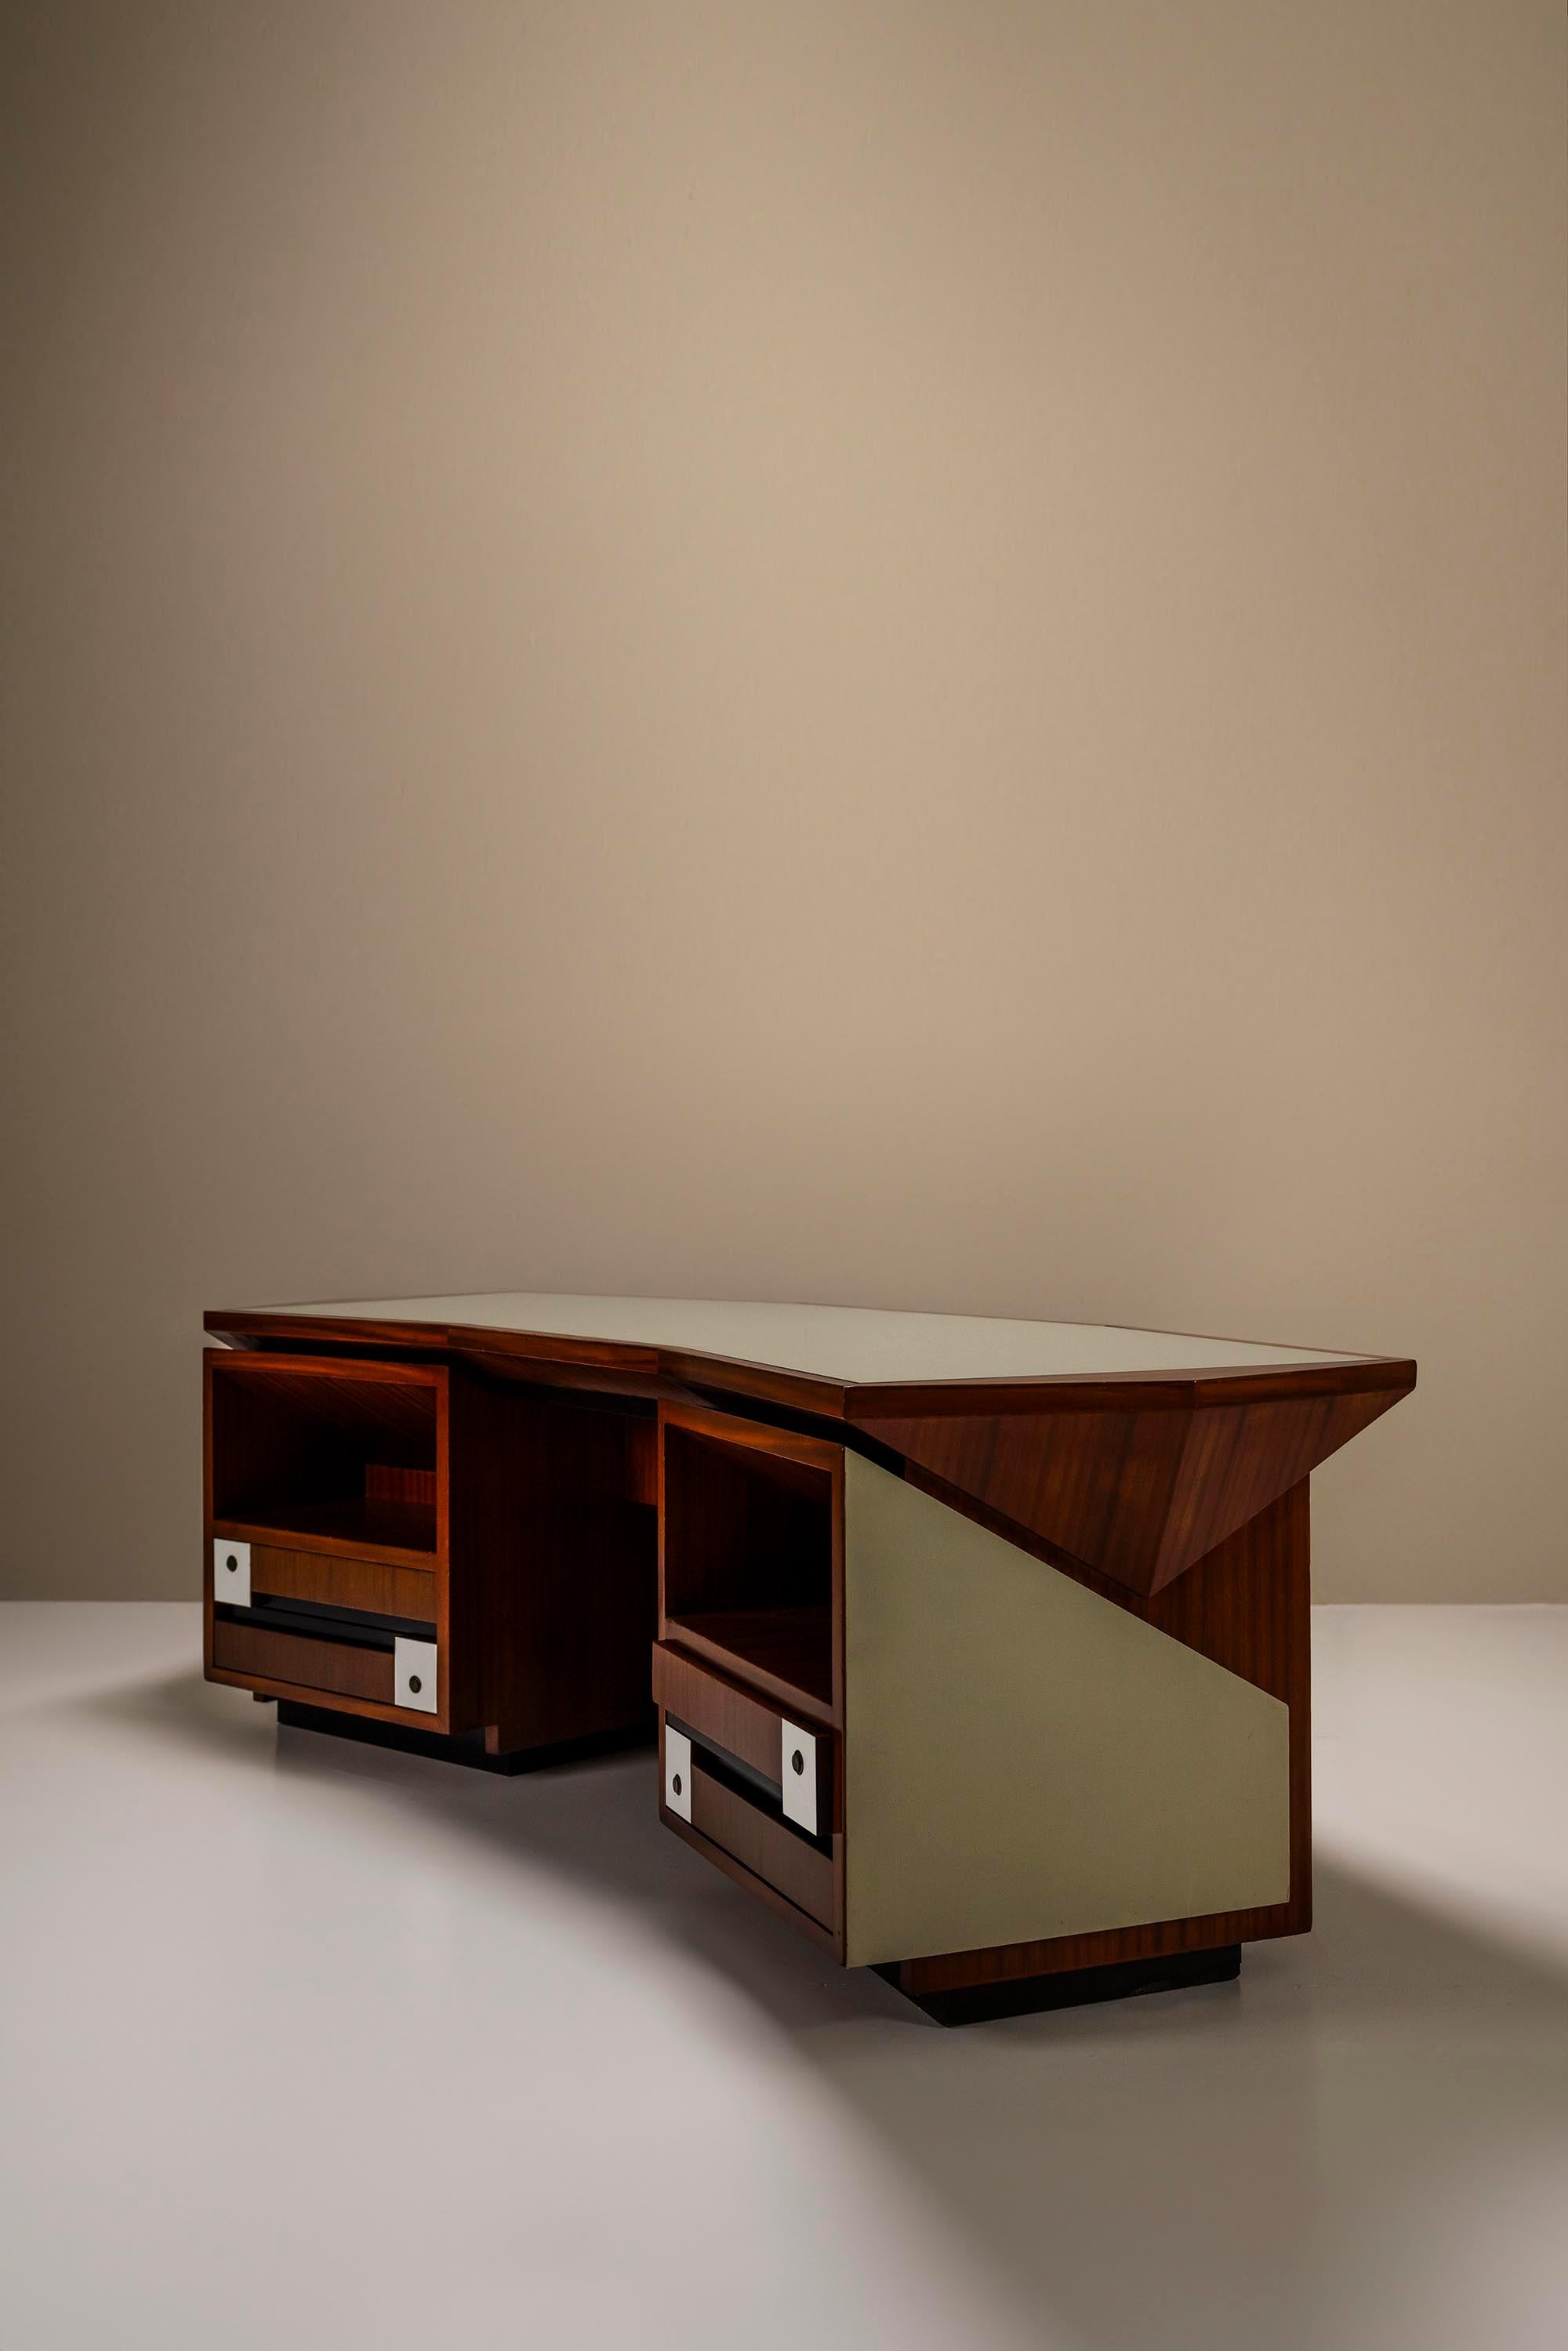 Mid-20th Century Architectural Desk In Mahogany And Relief Textured Leather, Italy 1960's